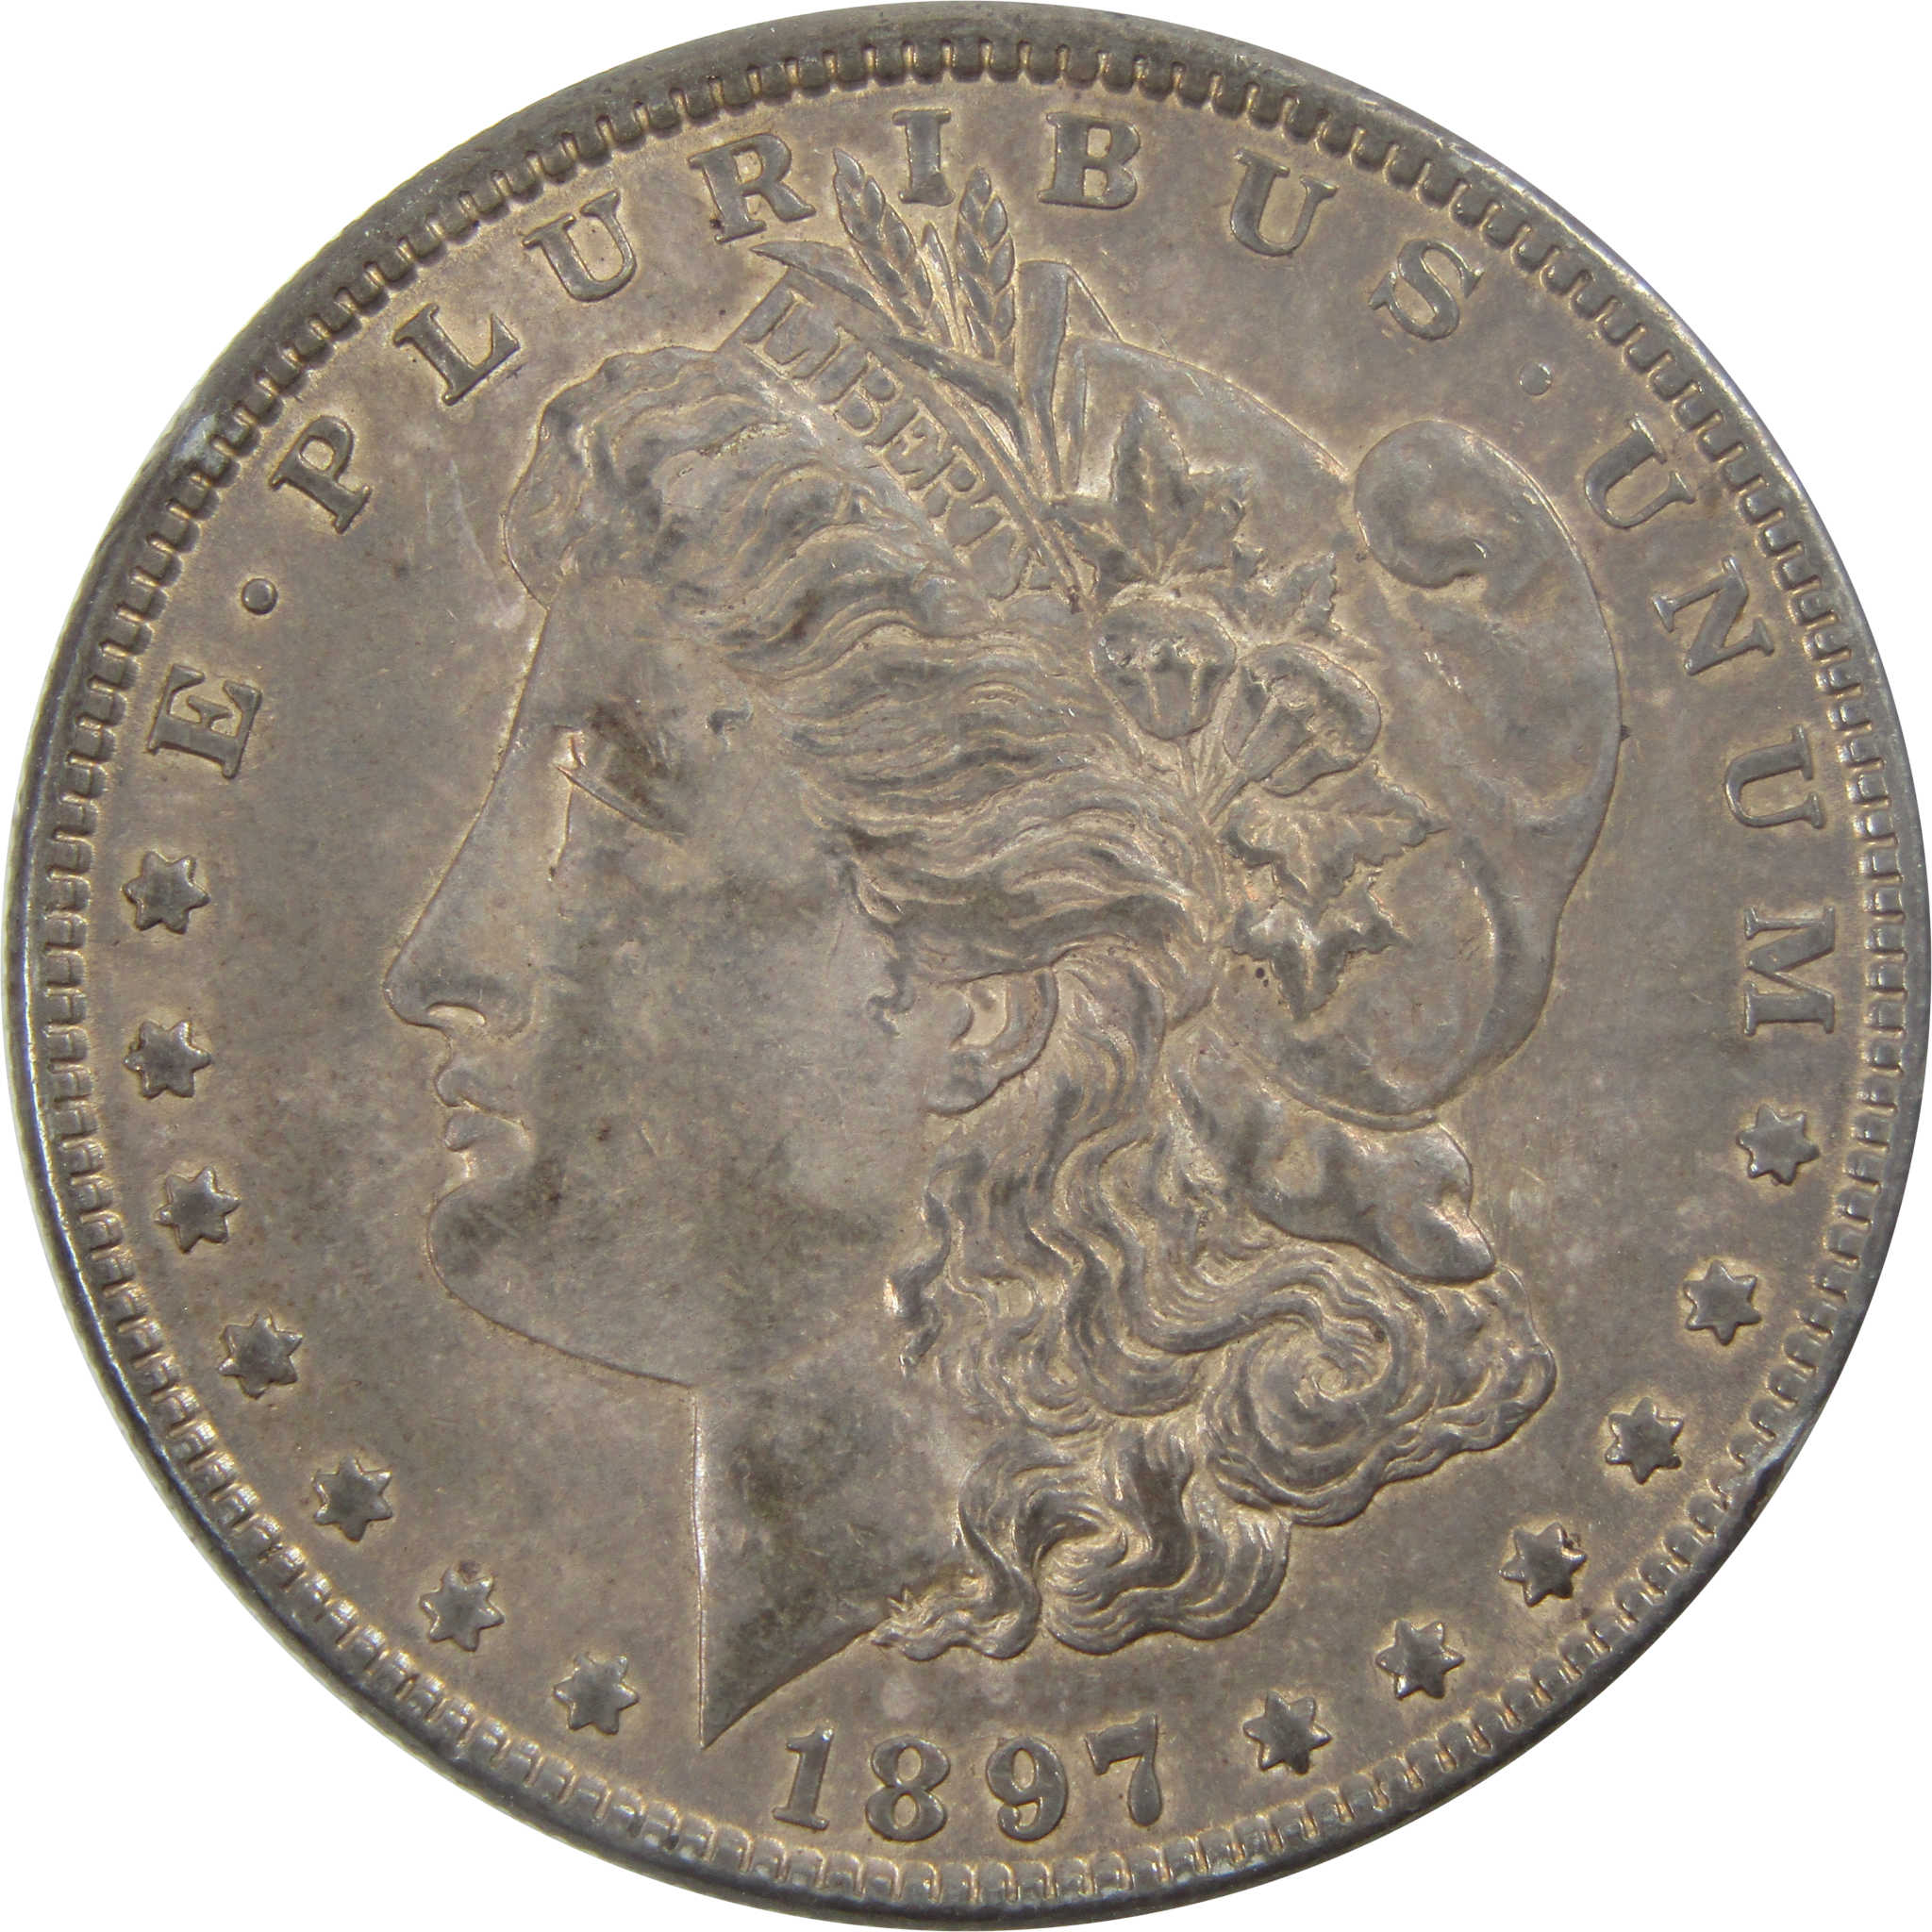 1897 Morgan Dollar XF EF Extremely Fine 90% Silver $1 Coin SKU:I5546 - Morgan coin - Morgan silver dollar - Morgan silver dollar for sale - Profile Coins &amp; Collectibles